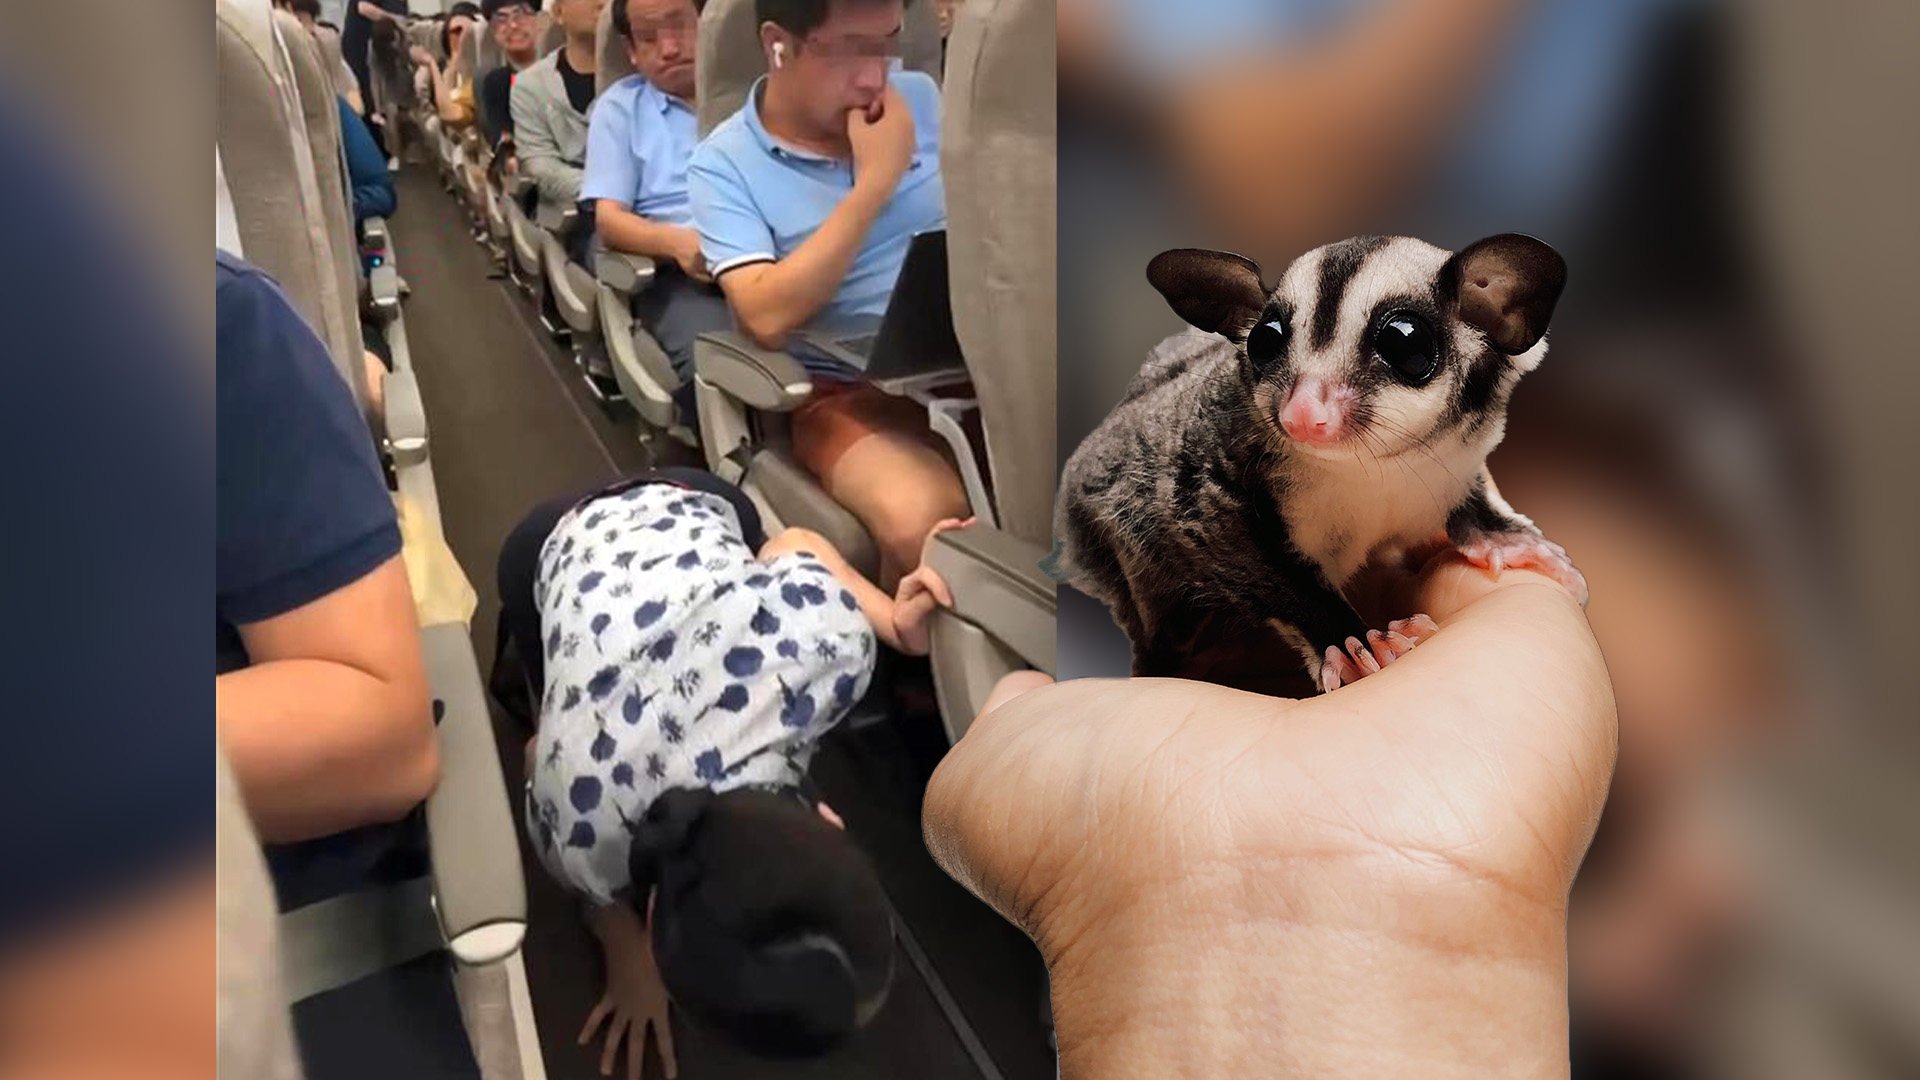 A commotion ensued when a Chinese woman brought her pet sugar glider onto a plane, prompting the evacuation of passengers. Photo: SCMP composite/Shutterstock/Douyin